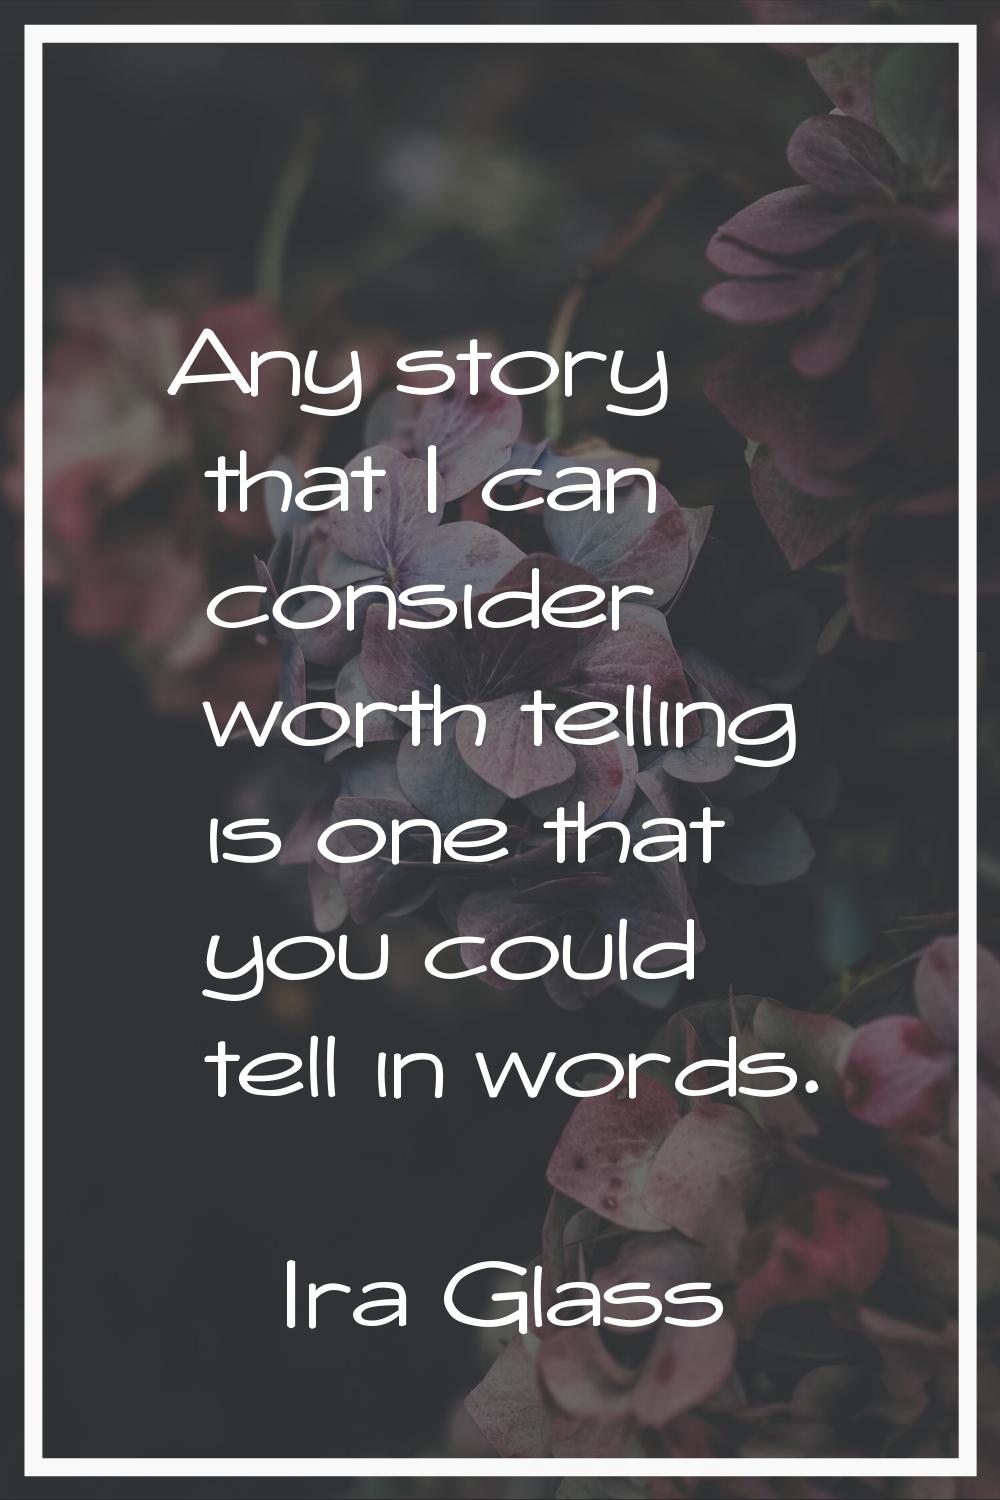 Any story that I can consider worth telling is one that you could tell in words.